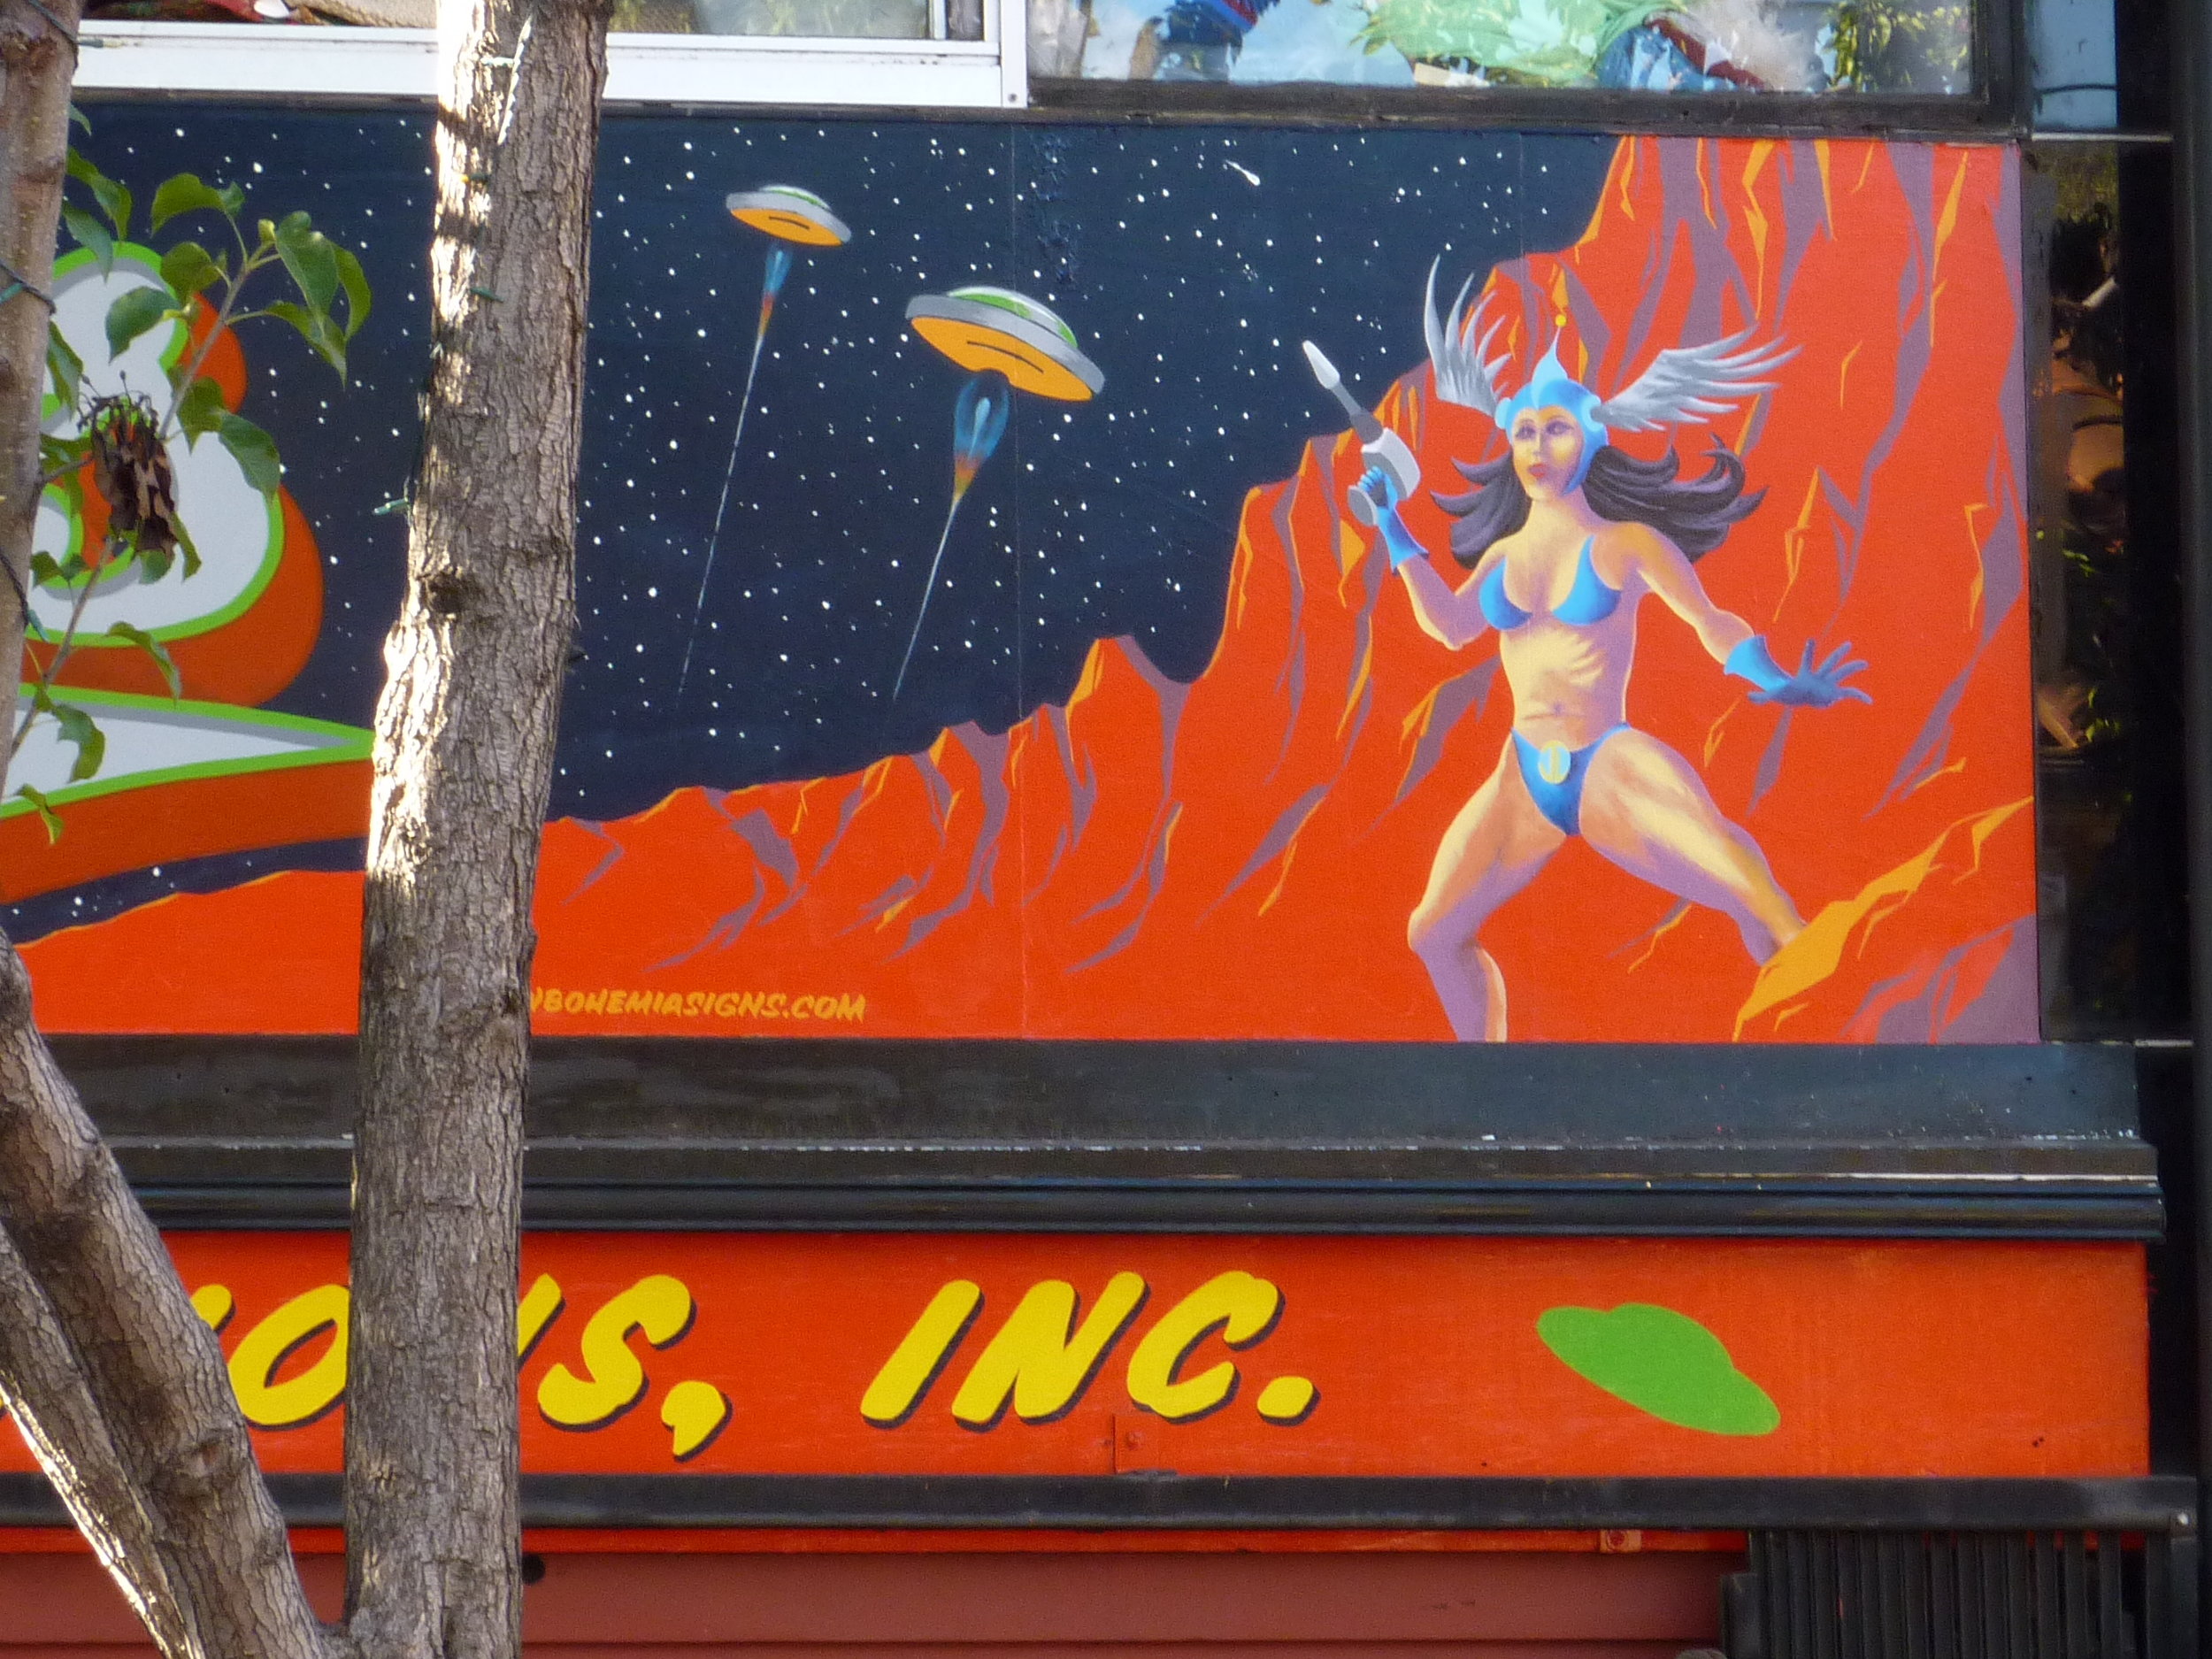 HAND-mars-storefront-warrior-babe-and-flying-saucers-detail_4307287066_o.jpg